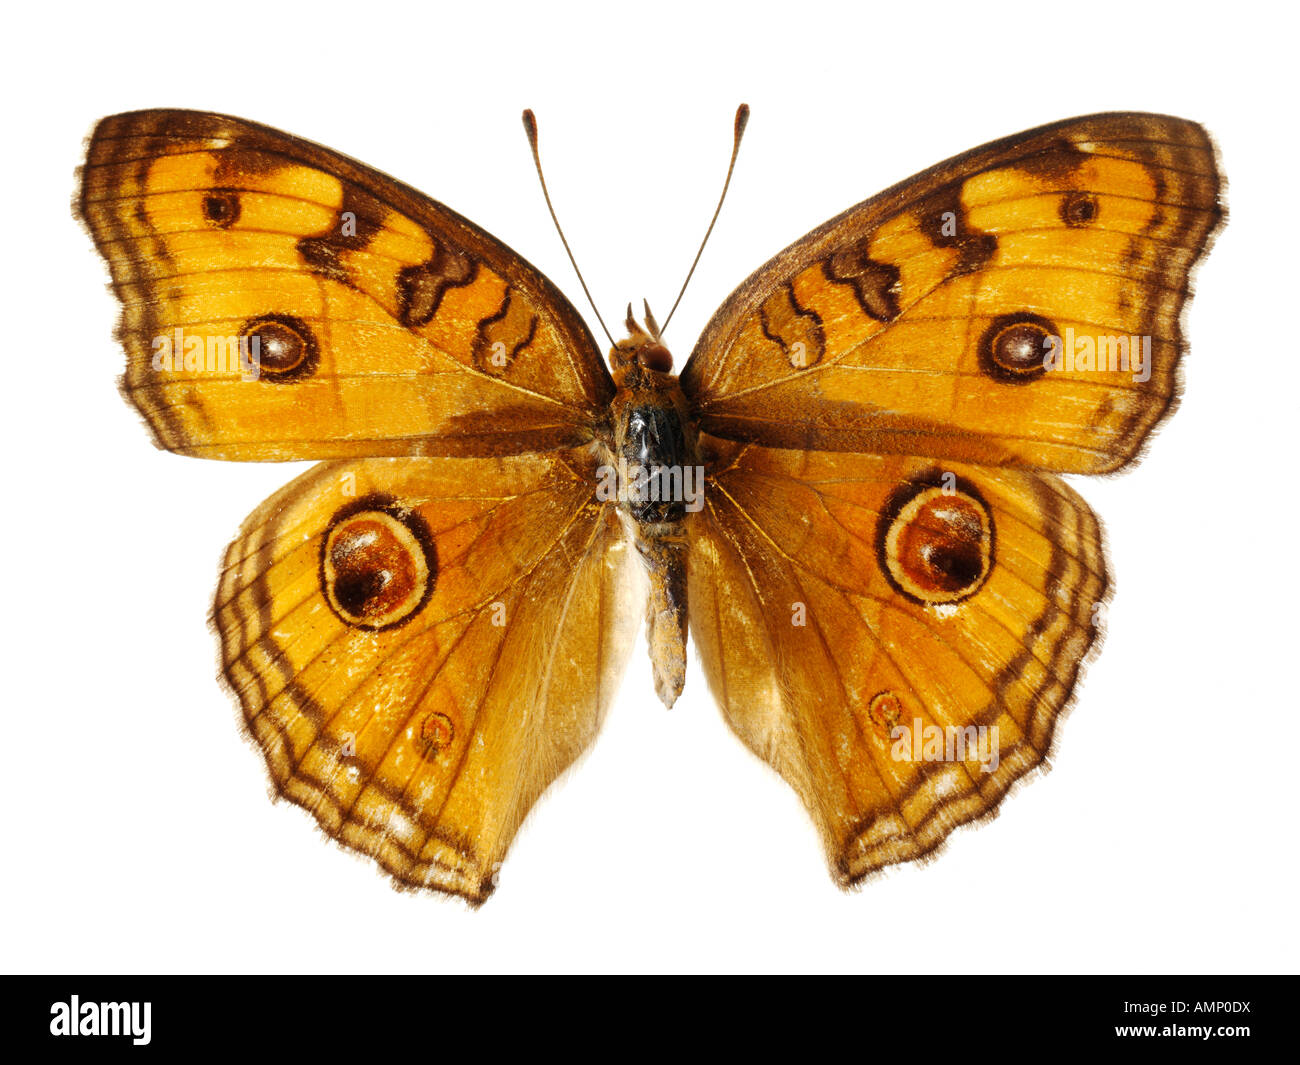 top shot plan view of a Nymphalidae butterfly, opened winged, against a white background in a studio Stock Photo